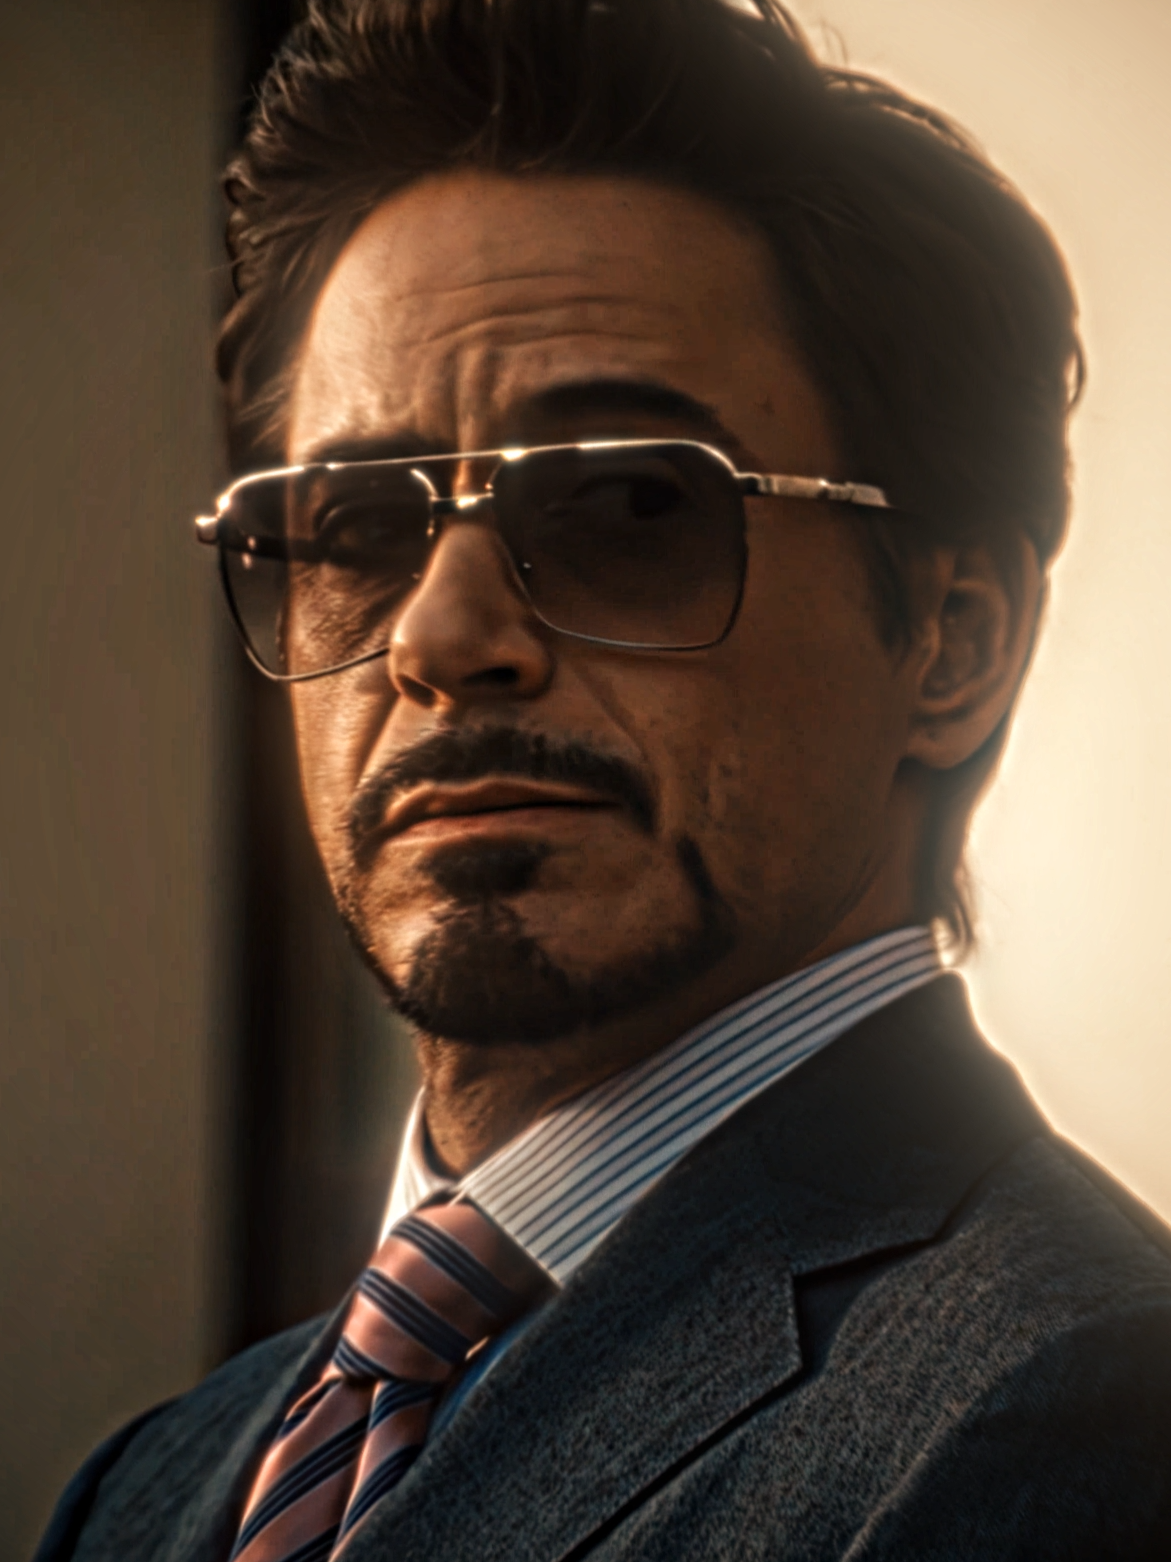 Can`t wait to get this guy back in the game - Tony Stark Edit | Don`t Copy My Flow (Slowed) | #aftereffects #edit #4k #ironman #rdj #robertdowneyjr #tonystark #tonystarkedit #ironmanedit #rdjedit #drdoom #marvel #marvelstudios #viral #fyp #foryou #foryoupage #fy #trending #movies #film